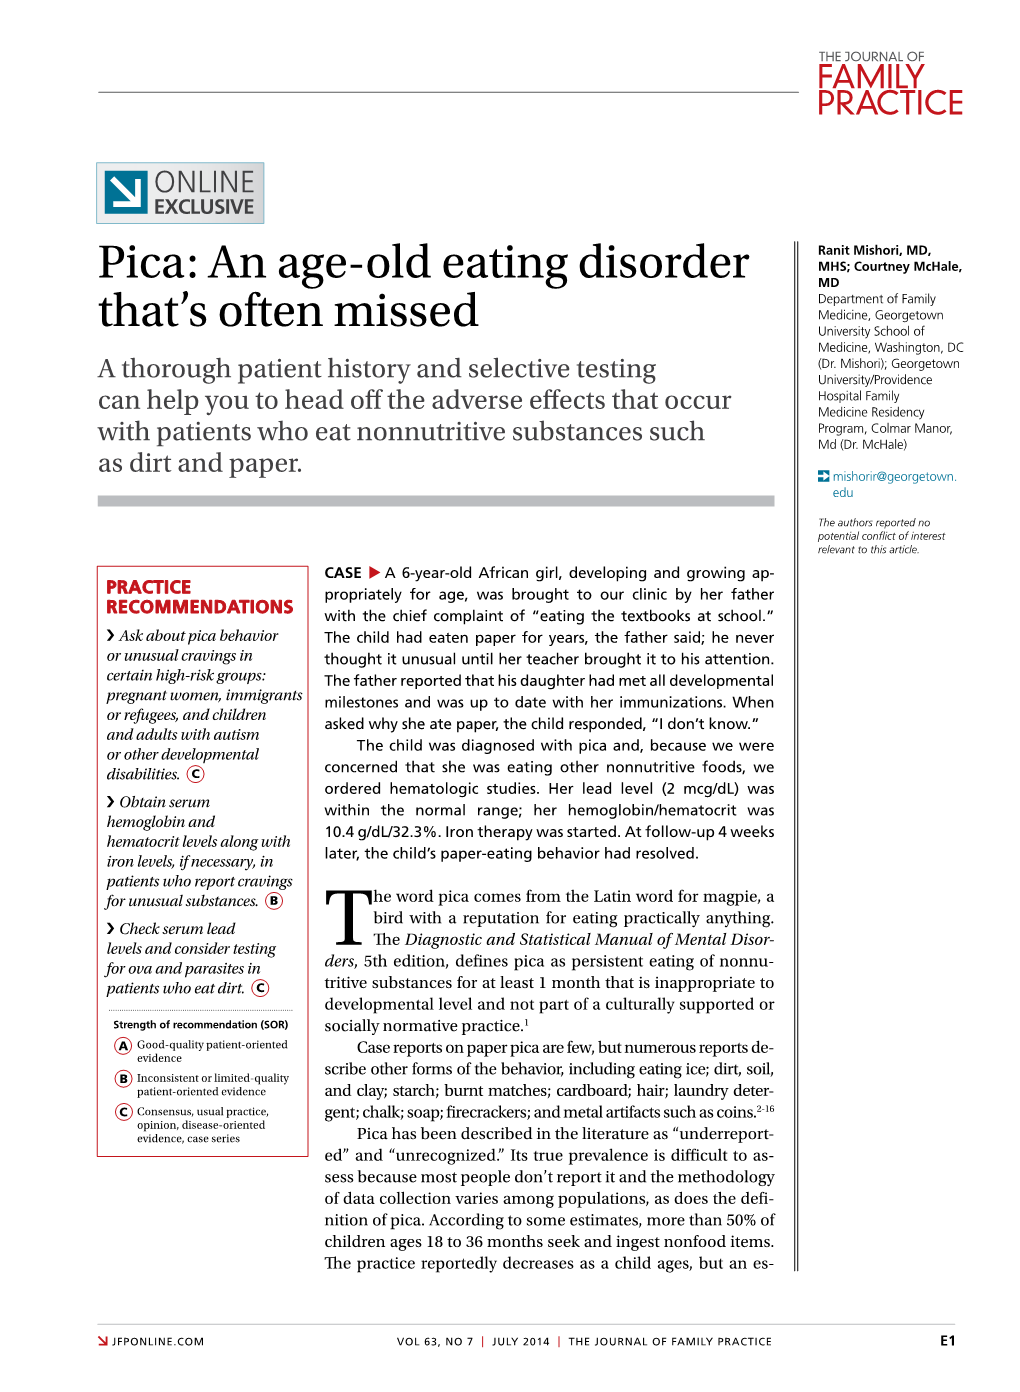 Pica: an Age-Old Eating Disorder That's Often Missed